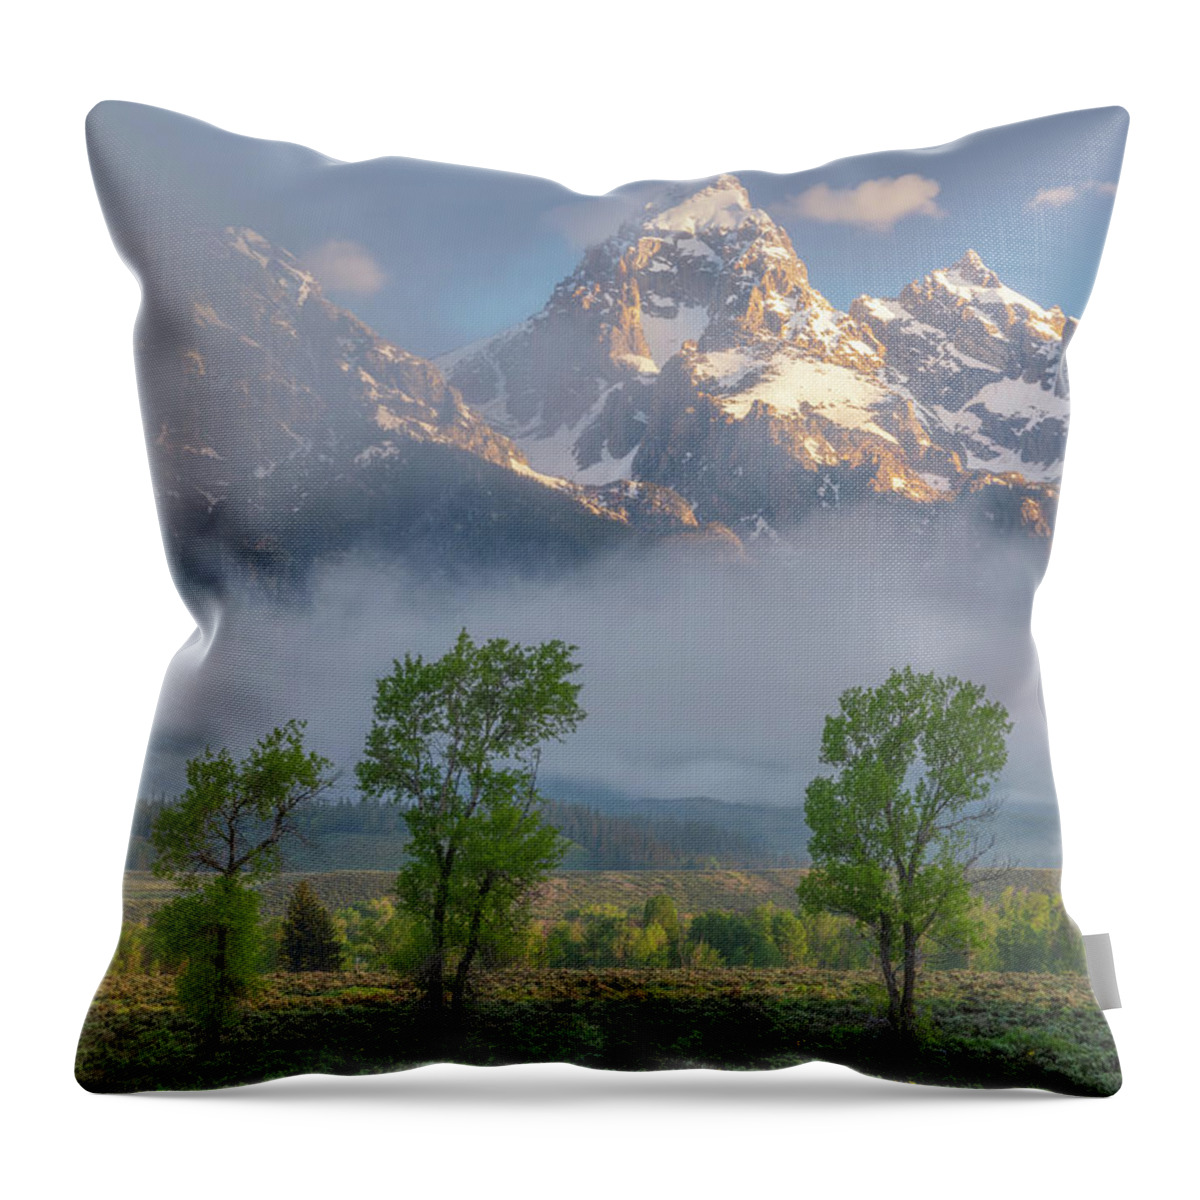 Tetons Throw Pillow featuring the photograph Good Morning Tetons by Darren White